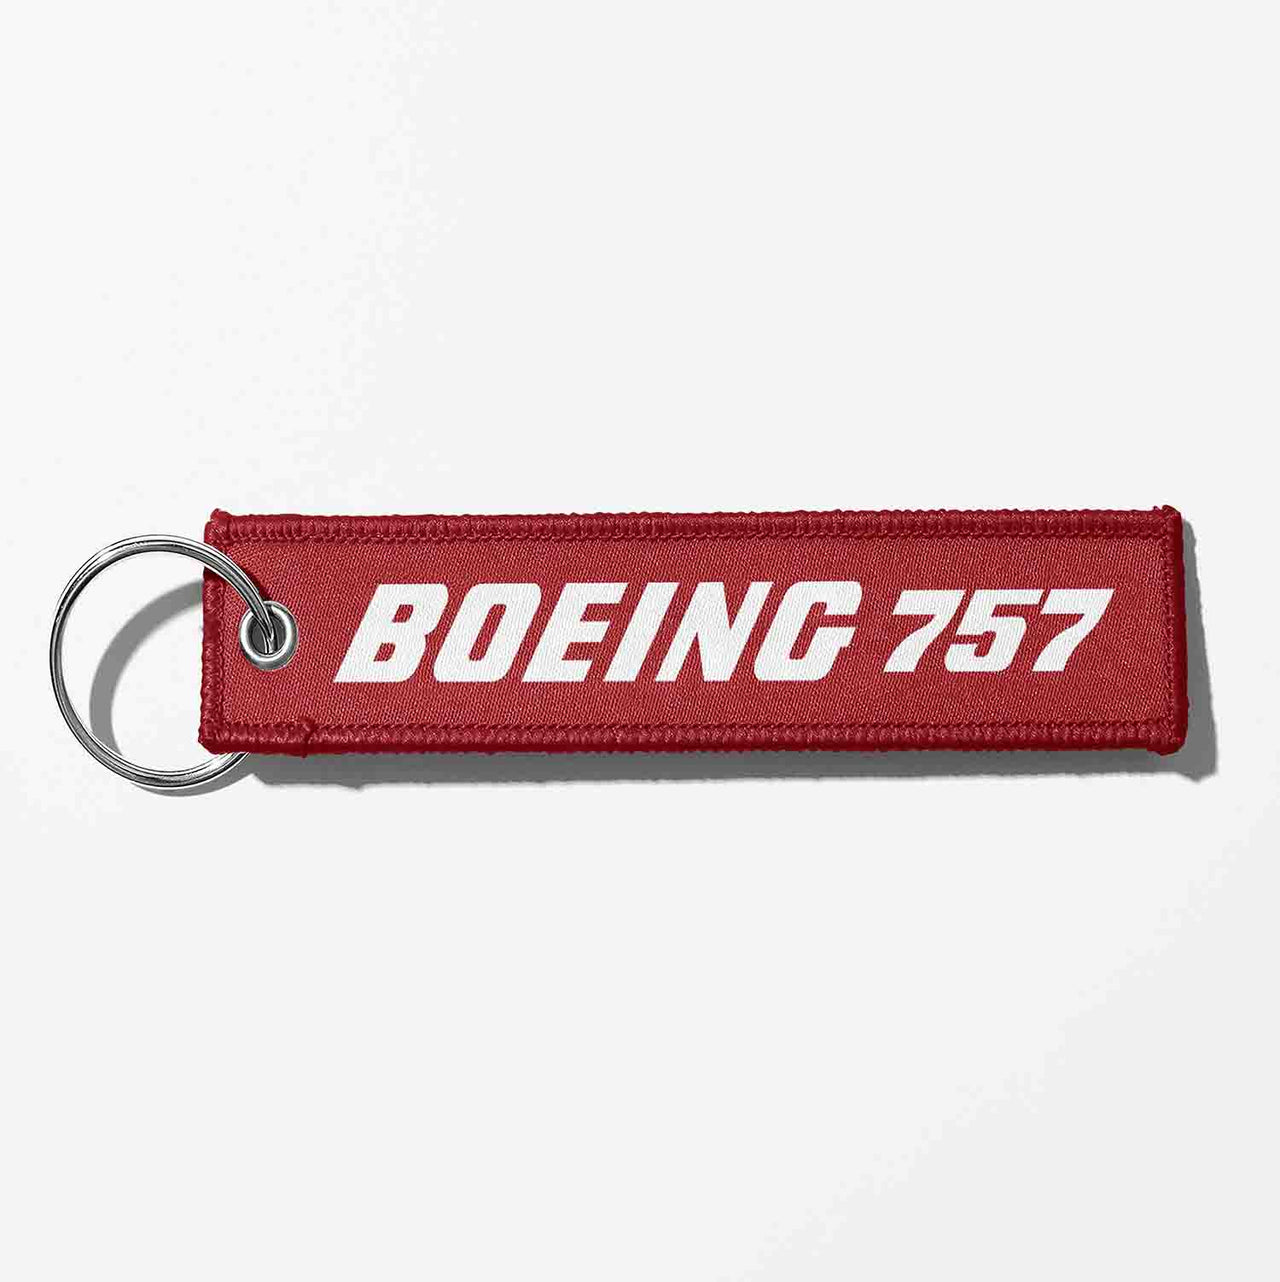 Boeing 757 & Text Designed Key Chains